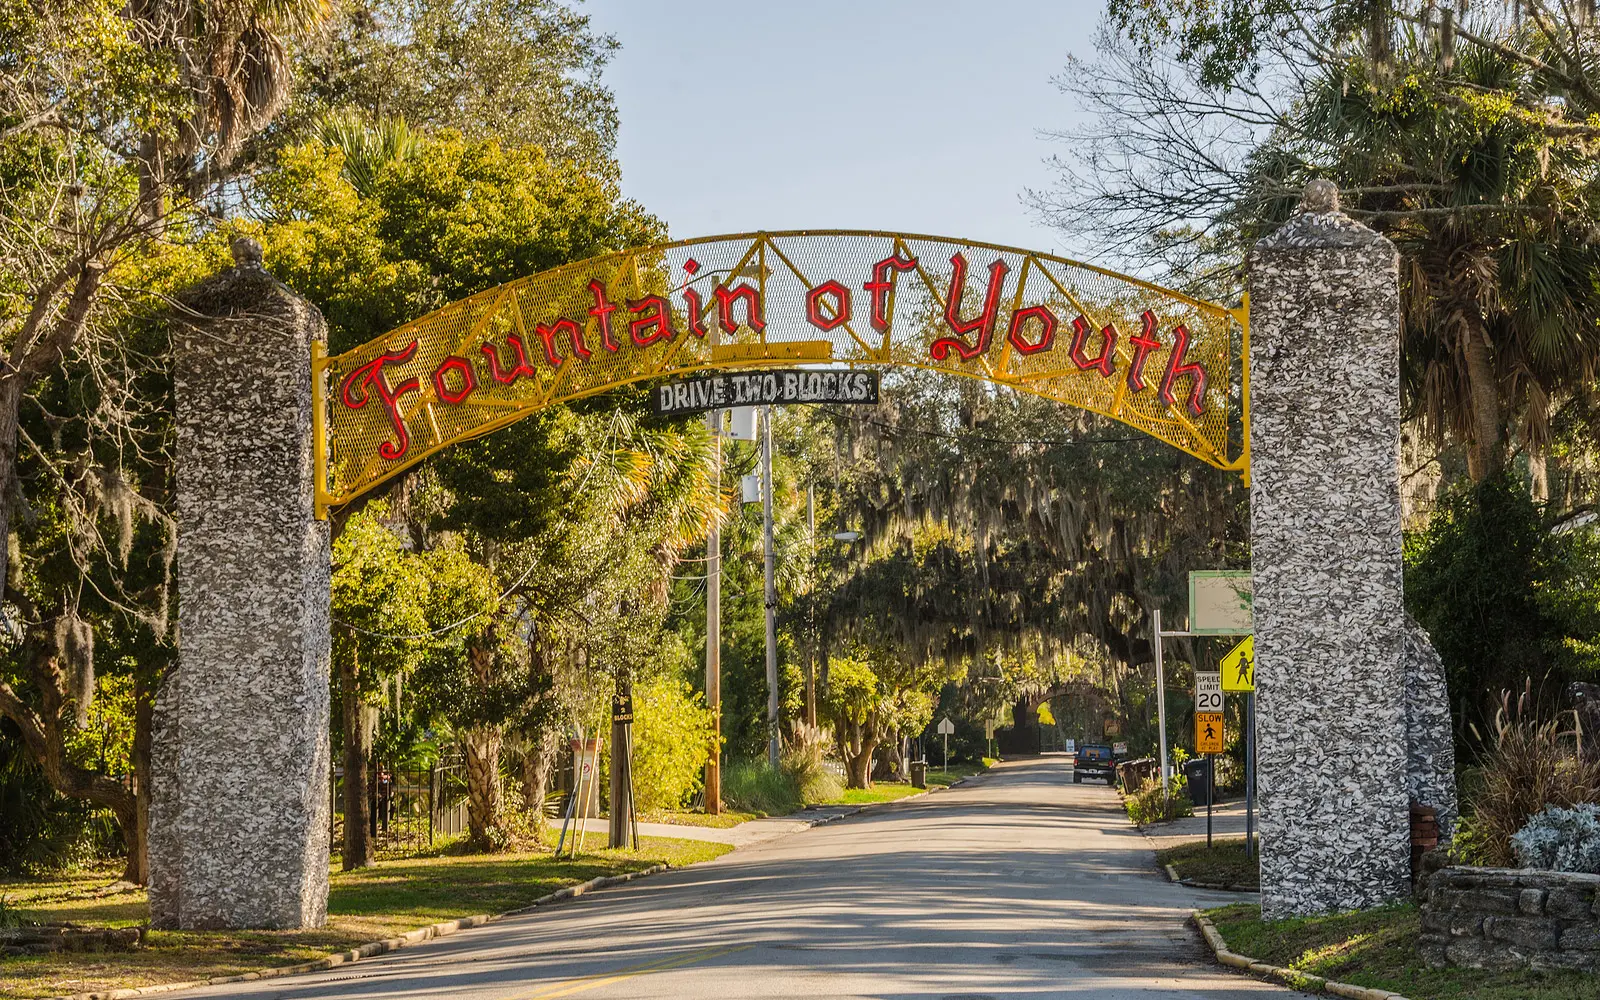 Visit the Fountain of Youth in St. Augustine